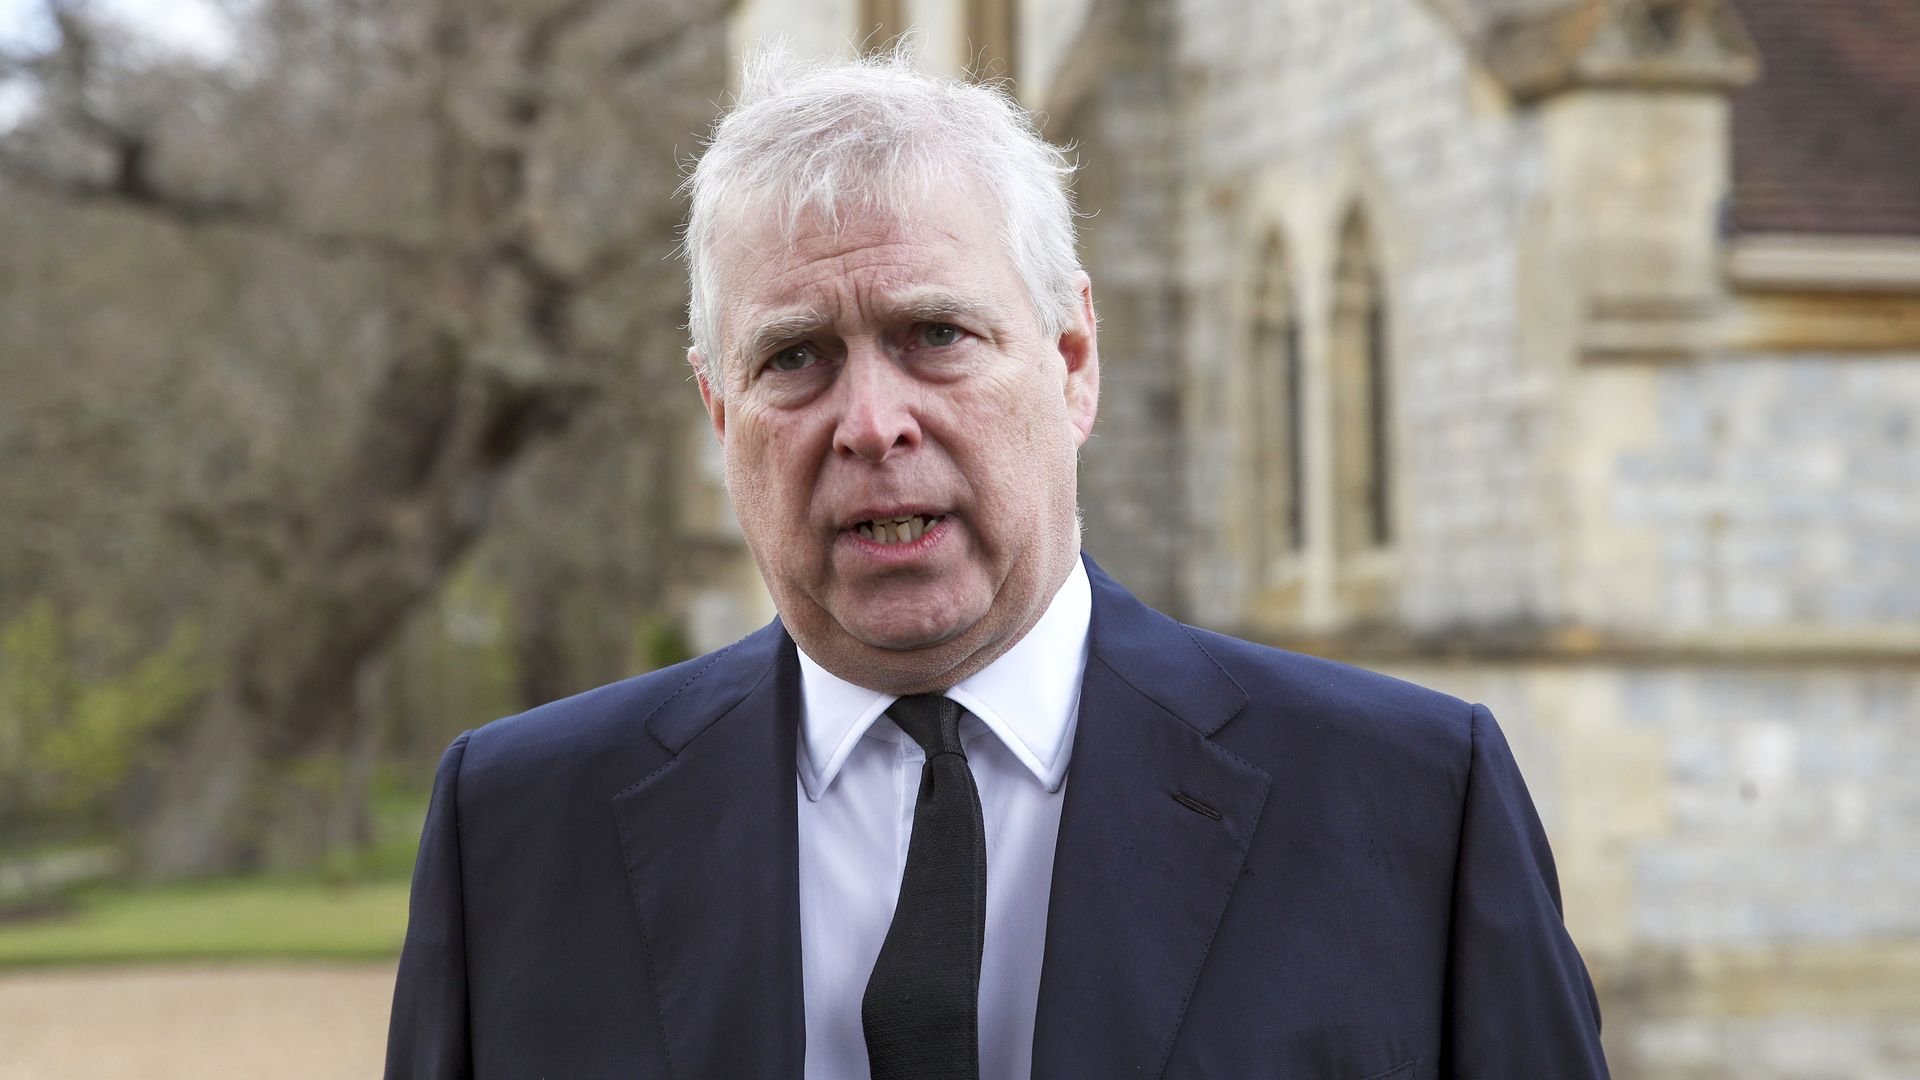 Prince Andrew settles sexual abuse lawsuit with Virginia Giuffre